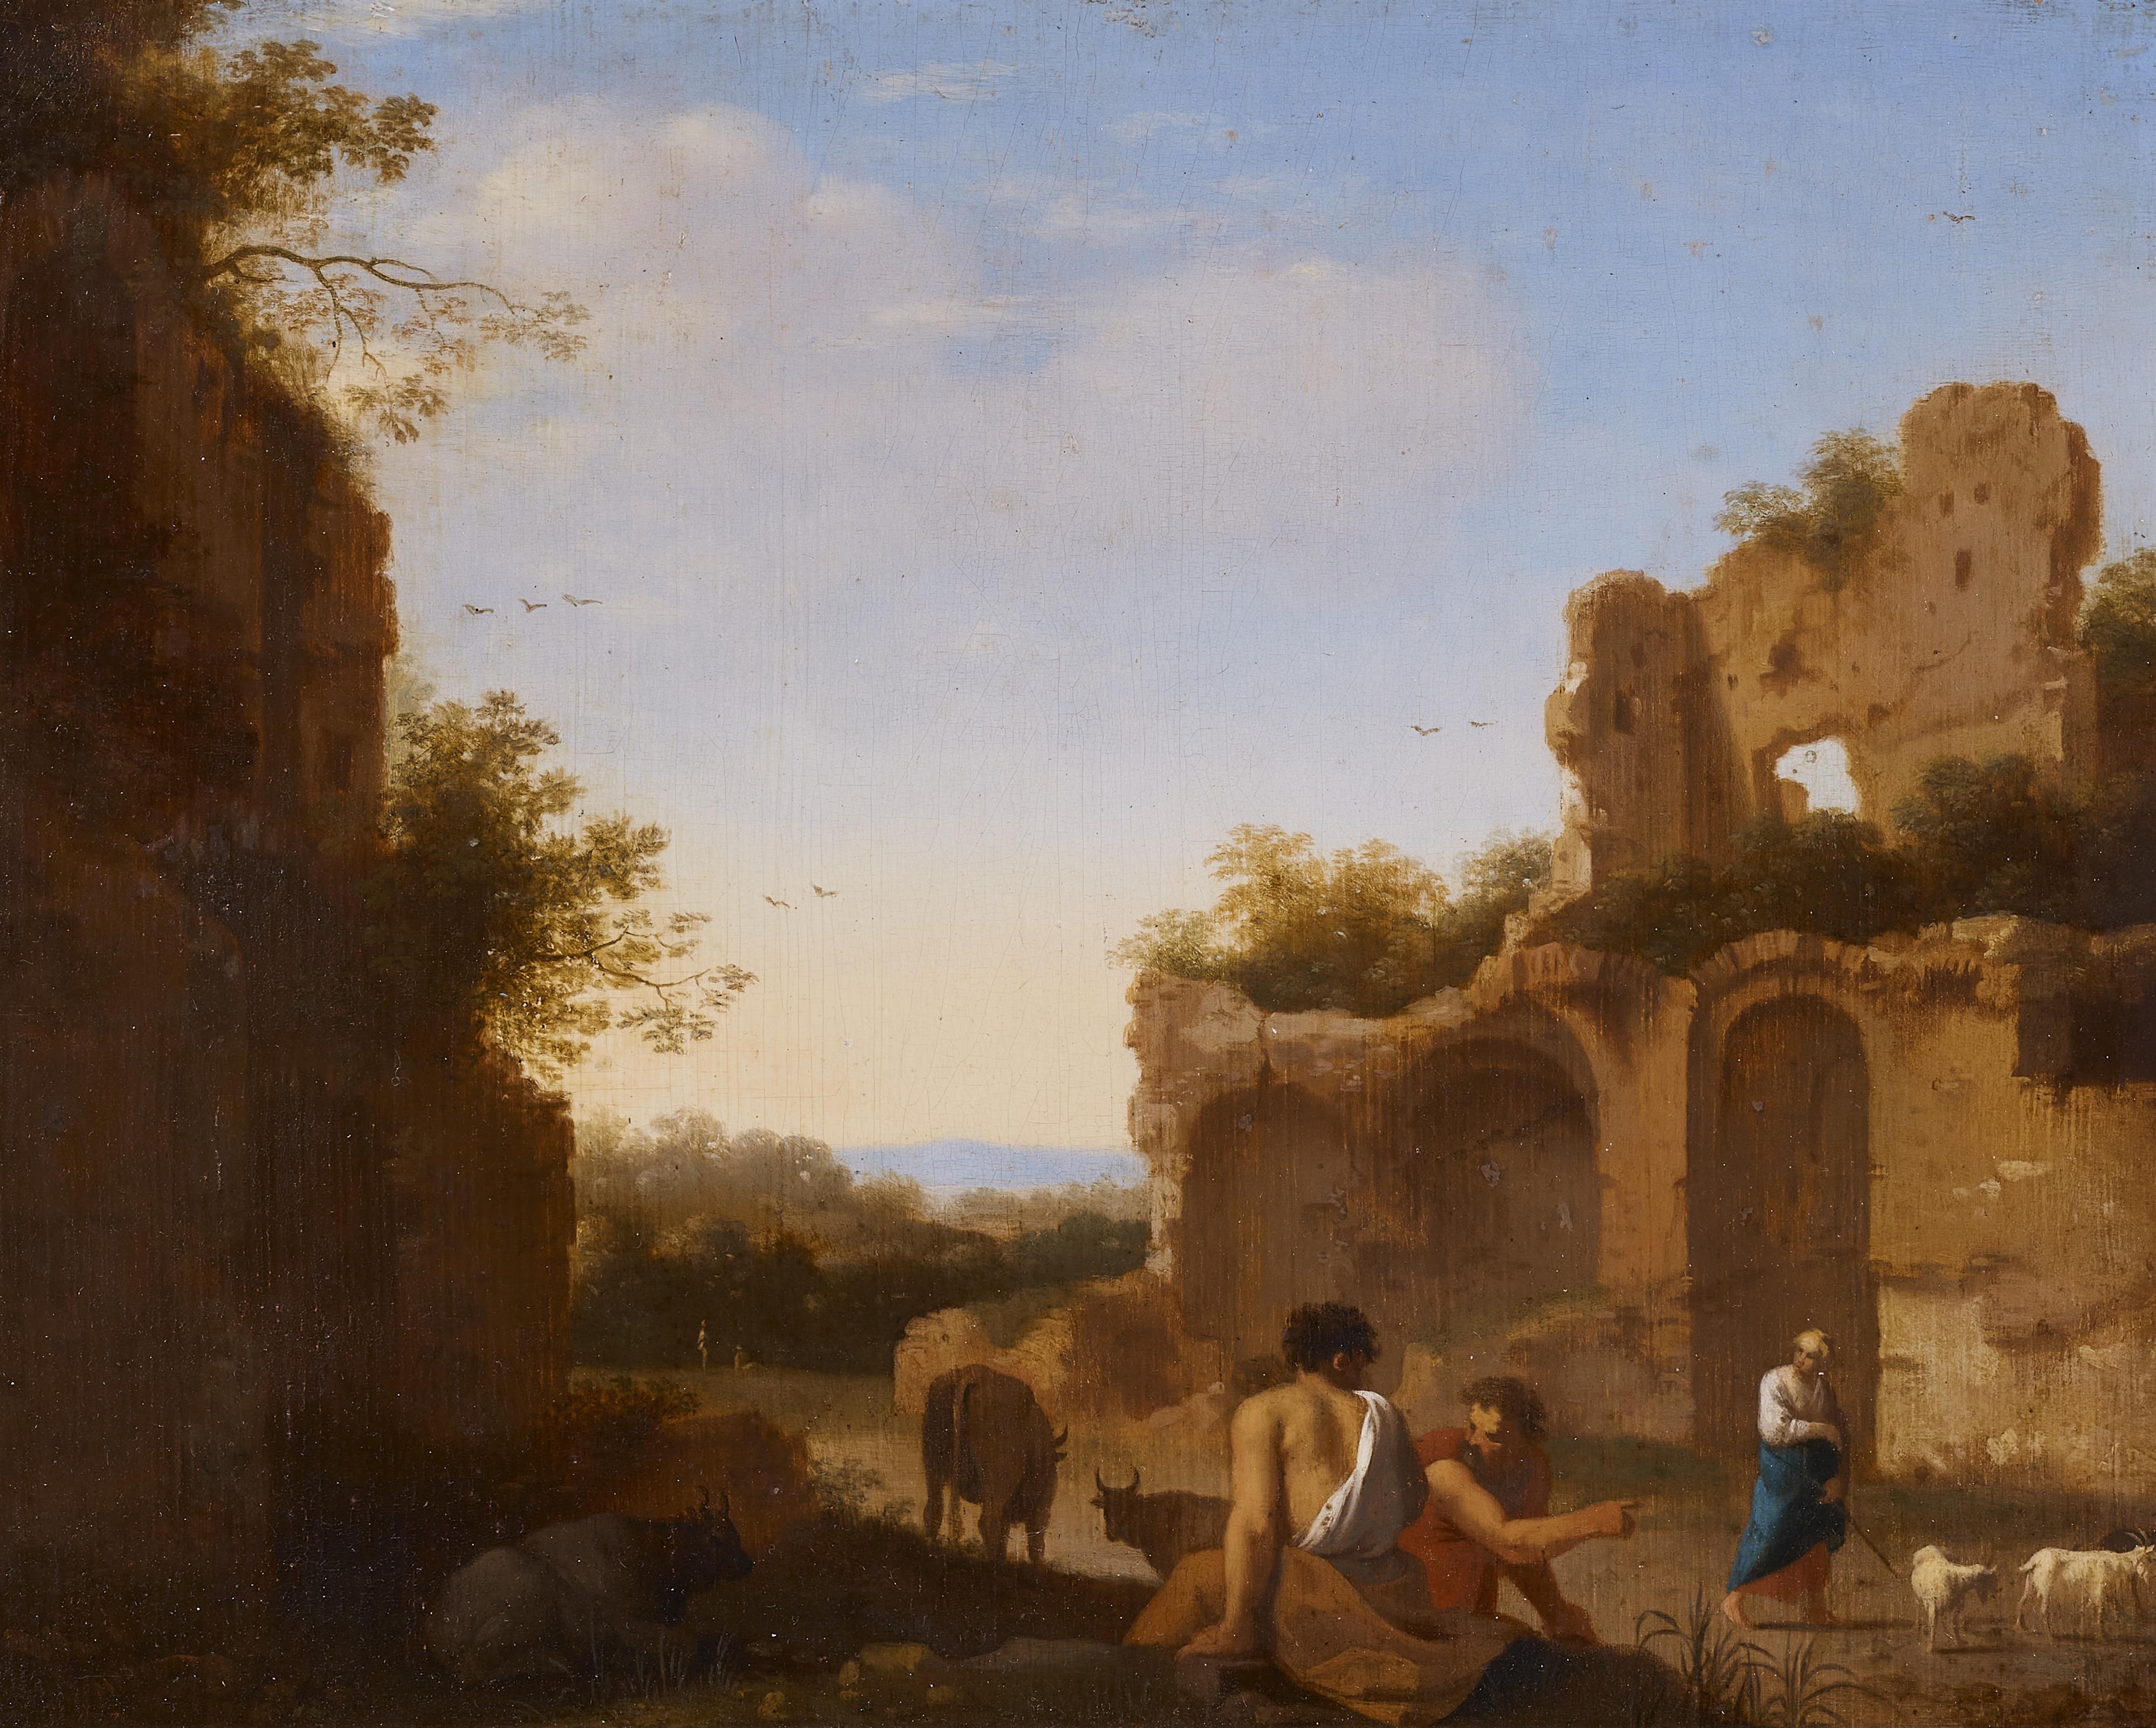 Cornelis van Poelenburgh, attributed to - Landscape with Ruins and Shepherds - image-1